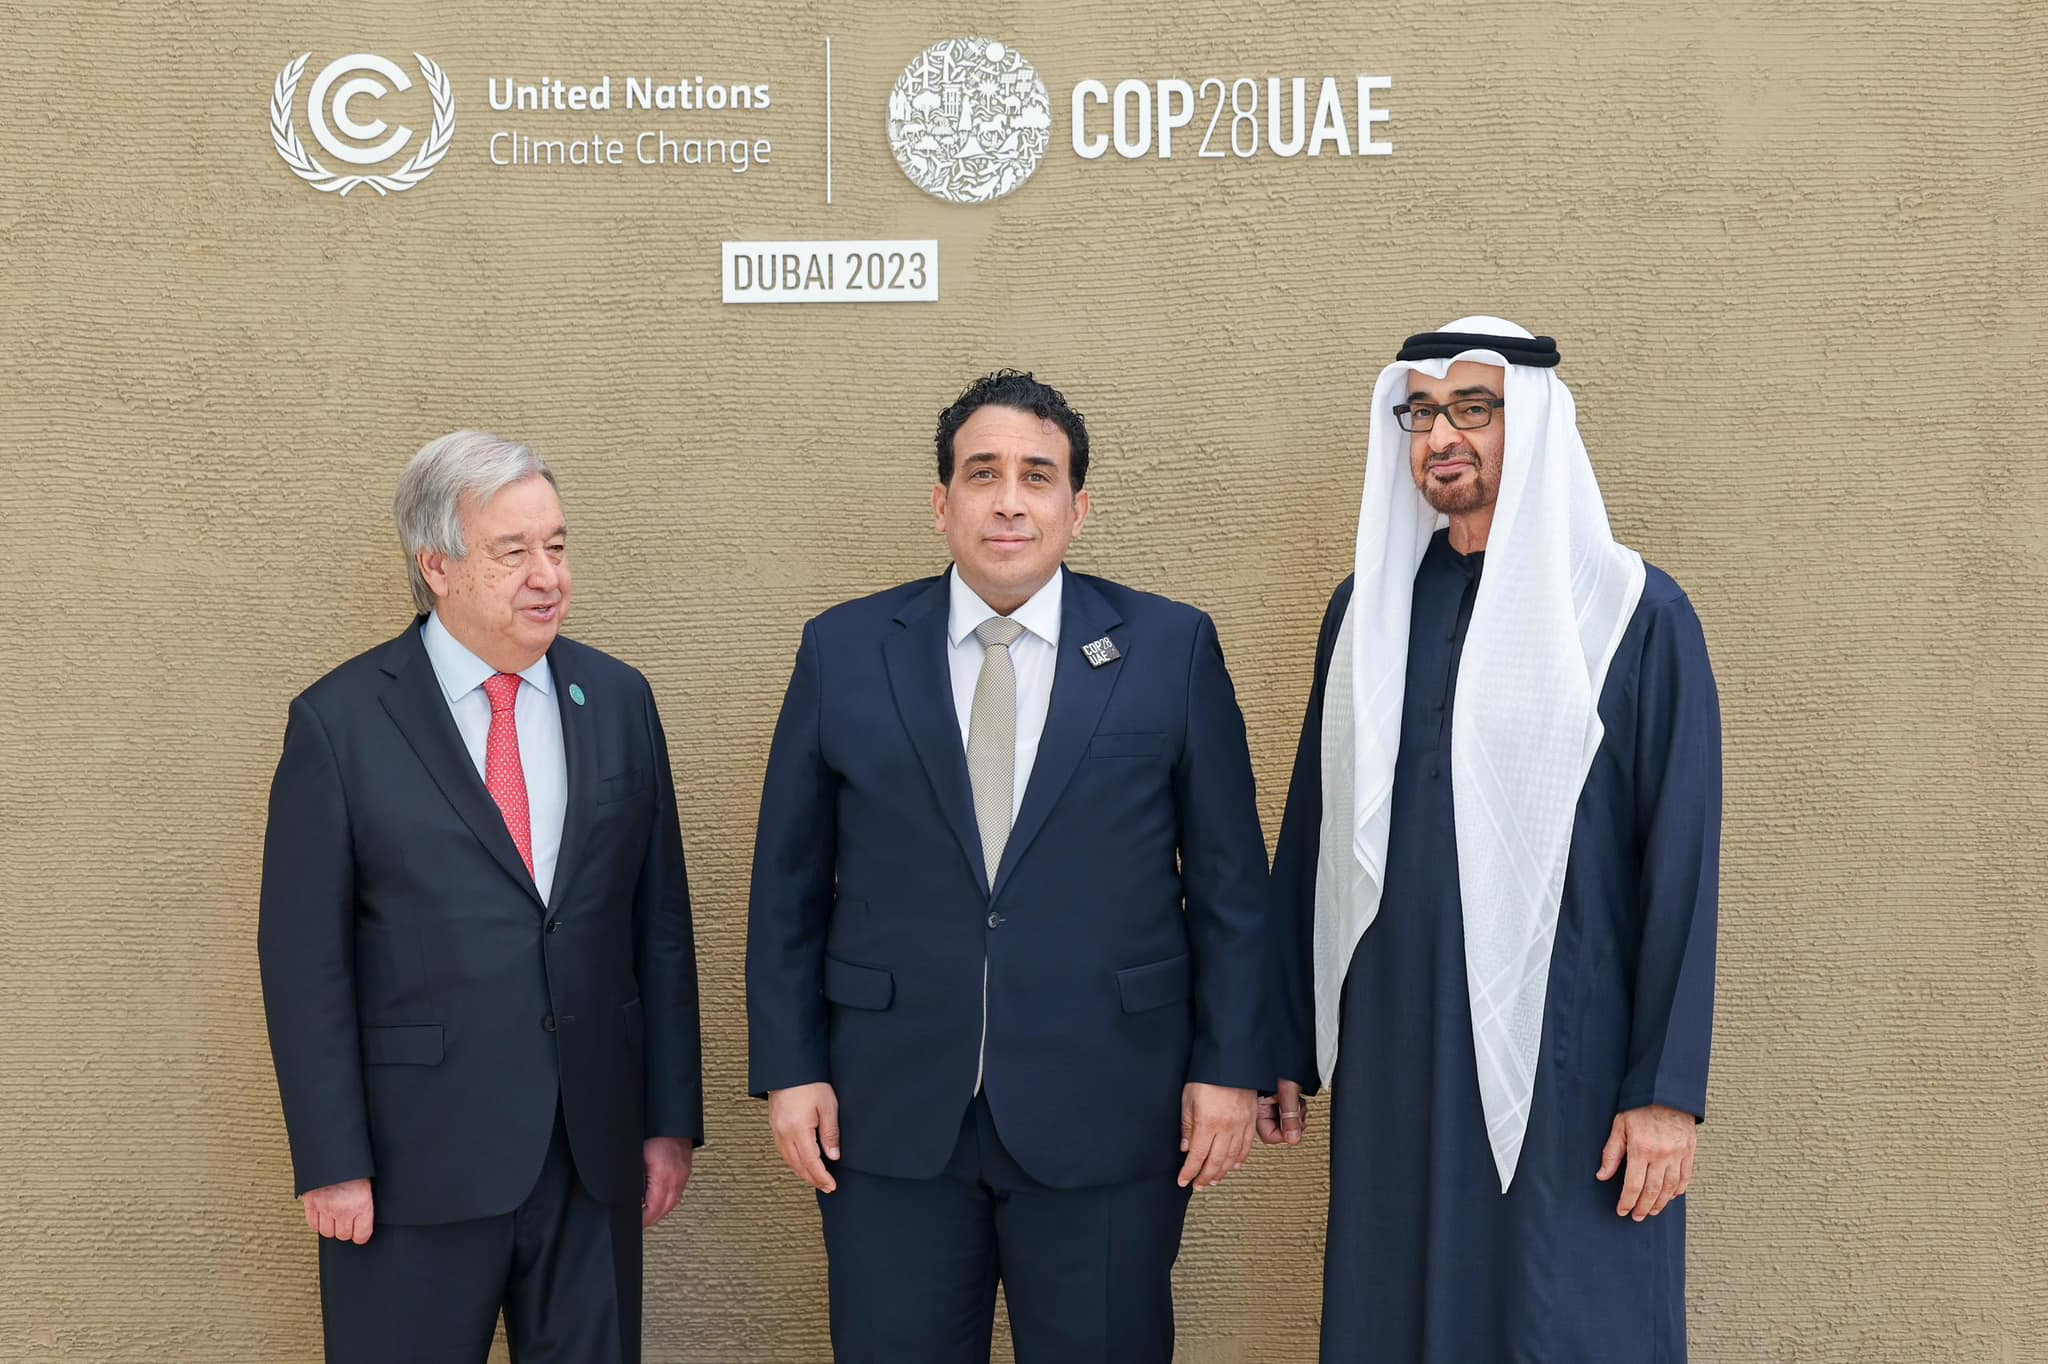 May be an image of 3 people and text that says 'C United Nations Climate Change COP28UAE DUBAI 2023 CORE'